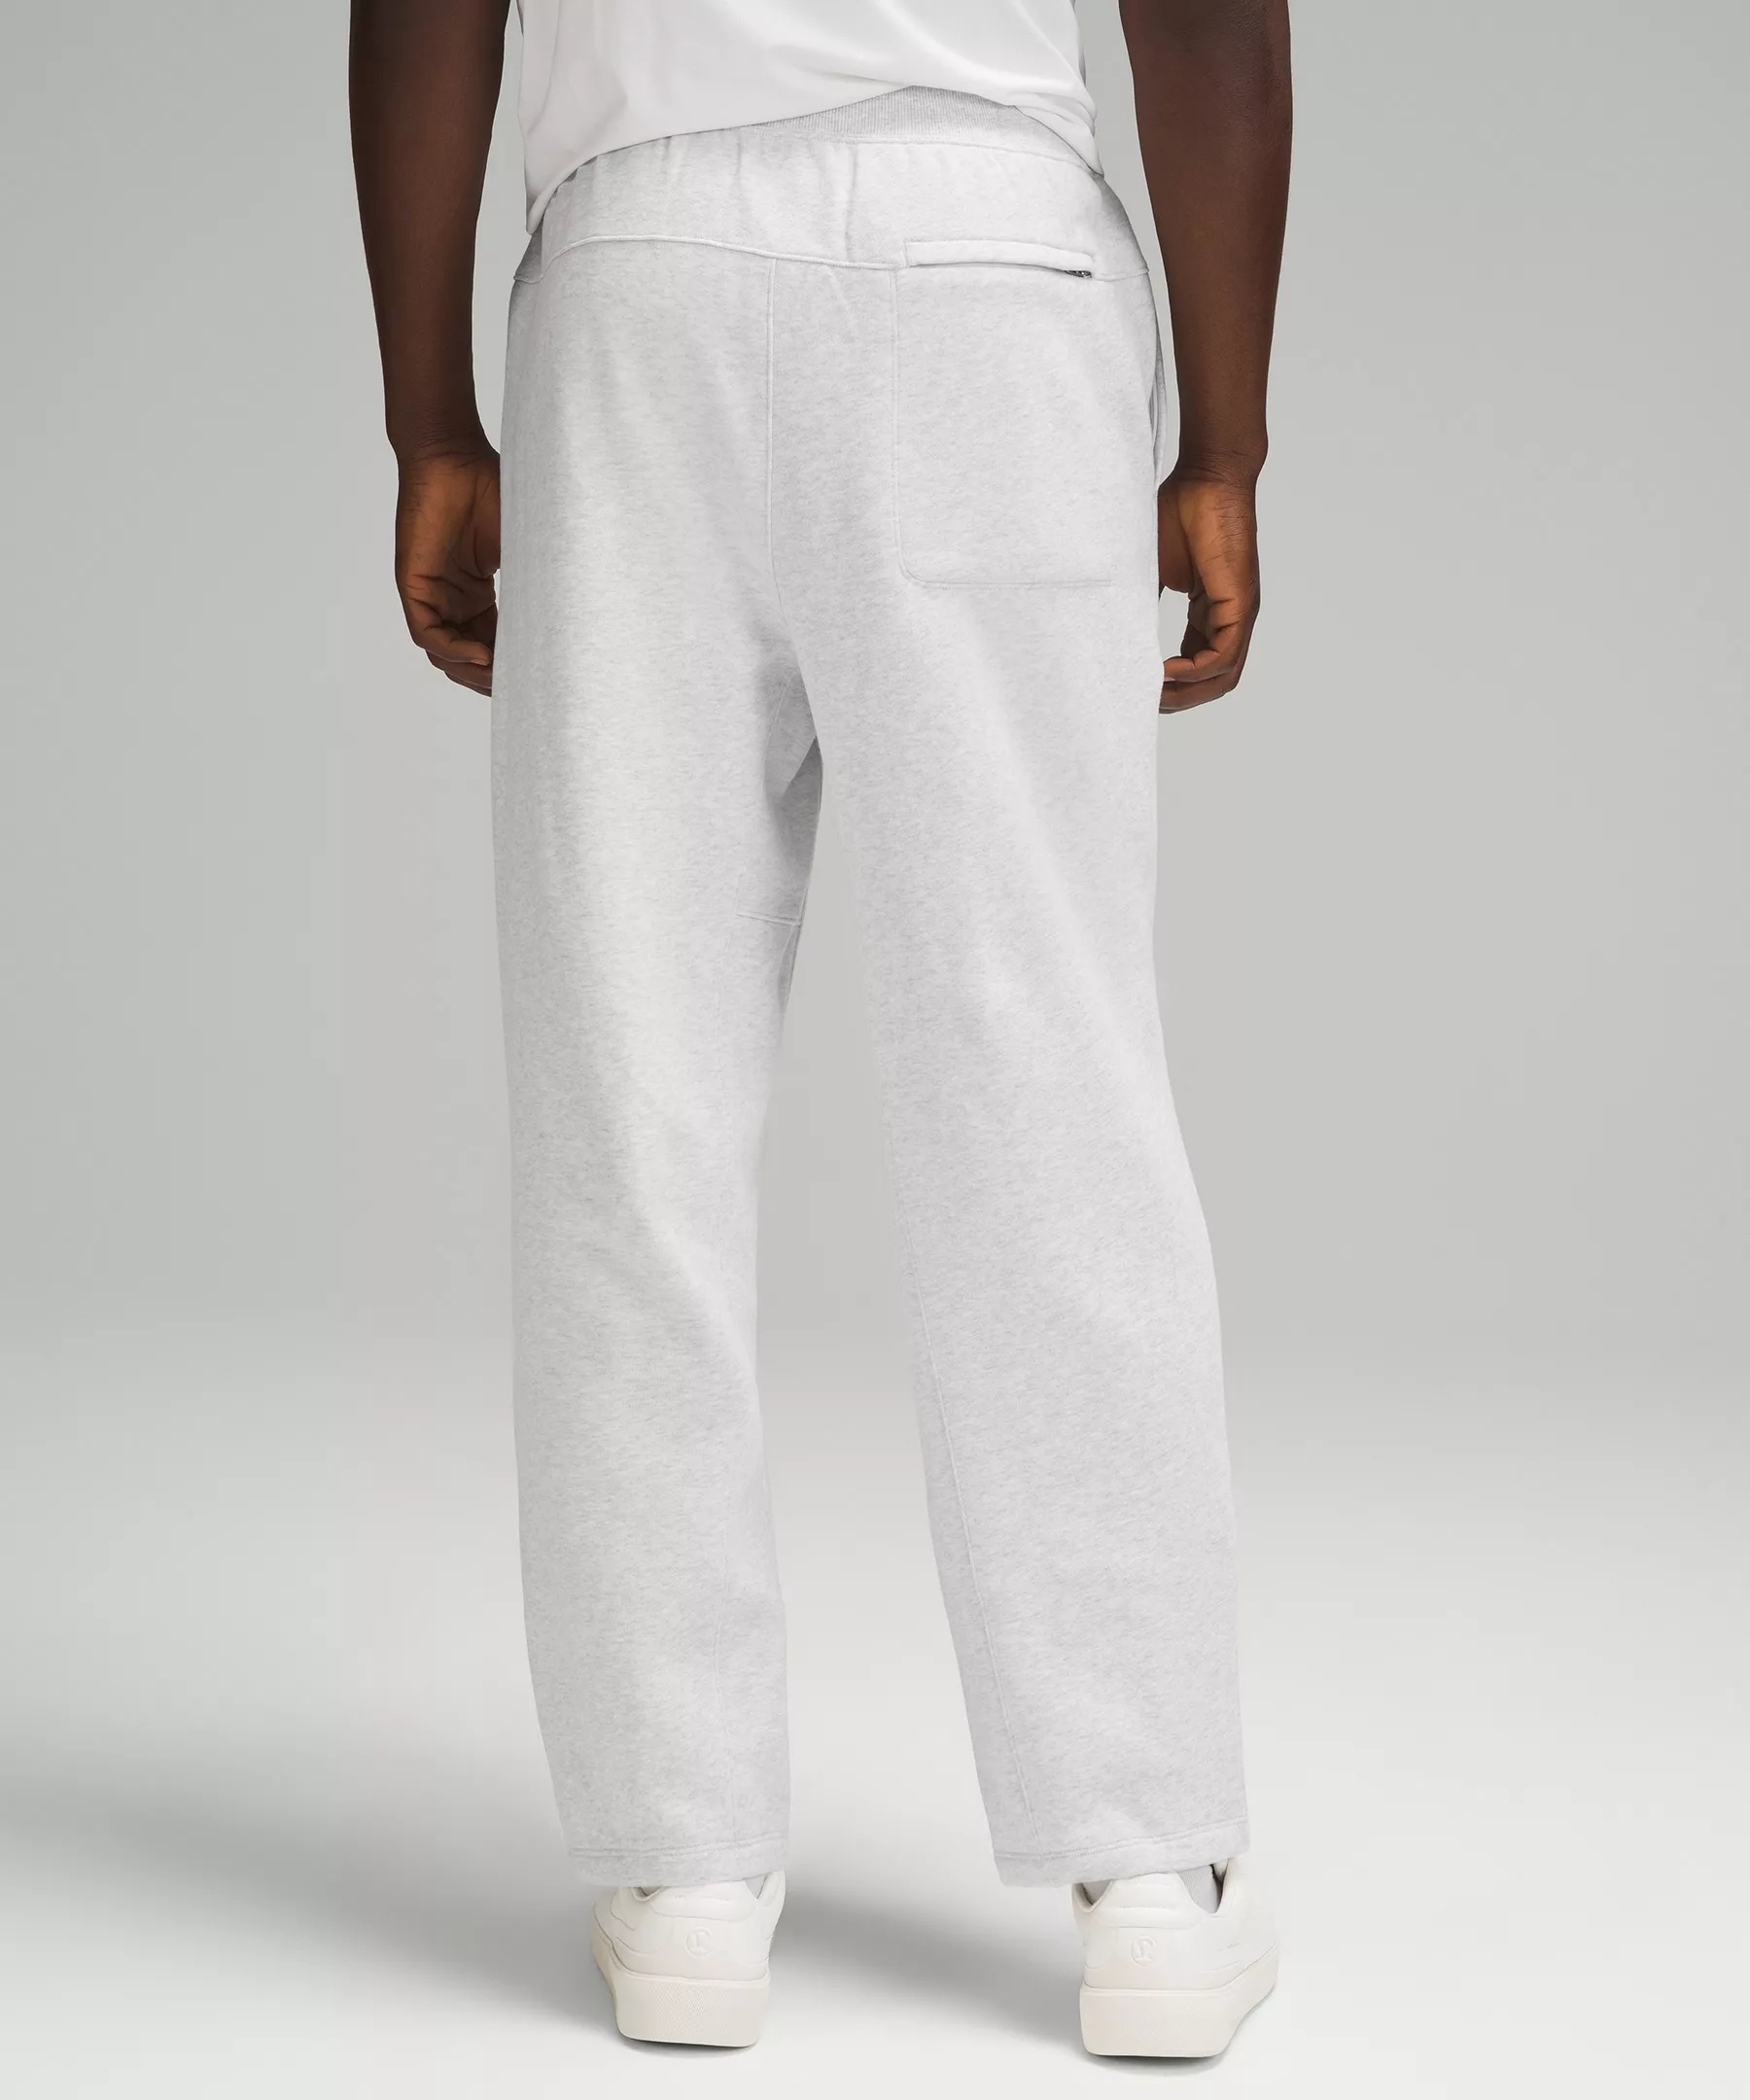 Steady State Pant *Shorter - 3